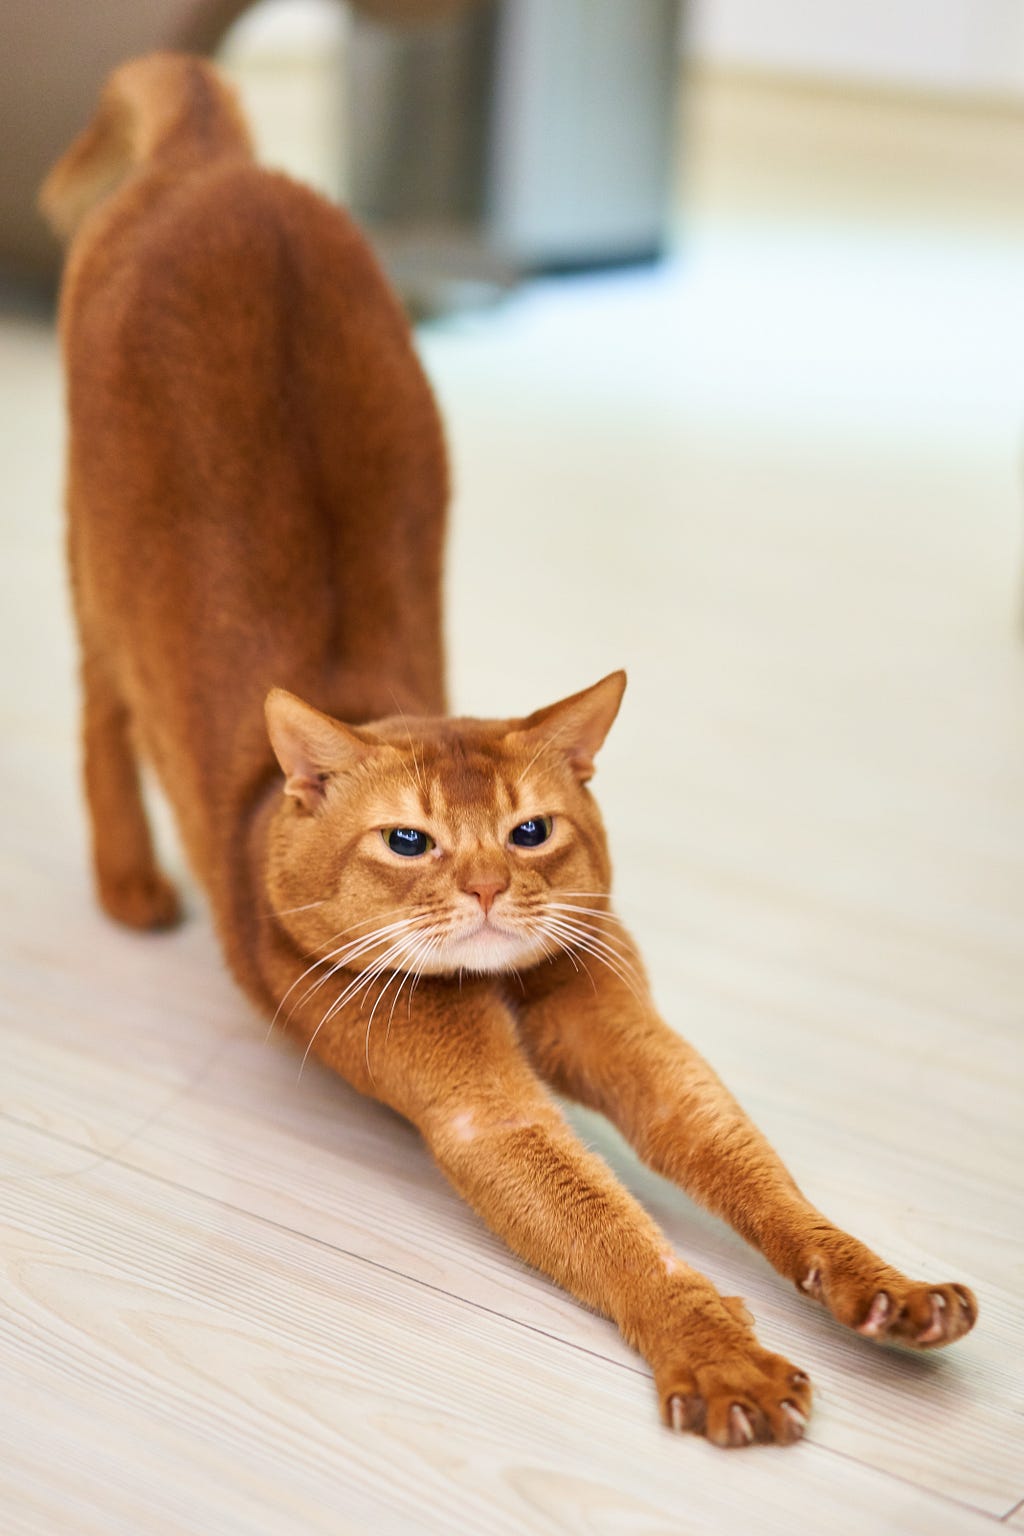 A photograph of an orange cat stretching. Photo by Timo Volz on Unsplash.